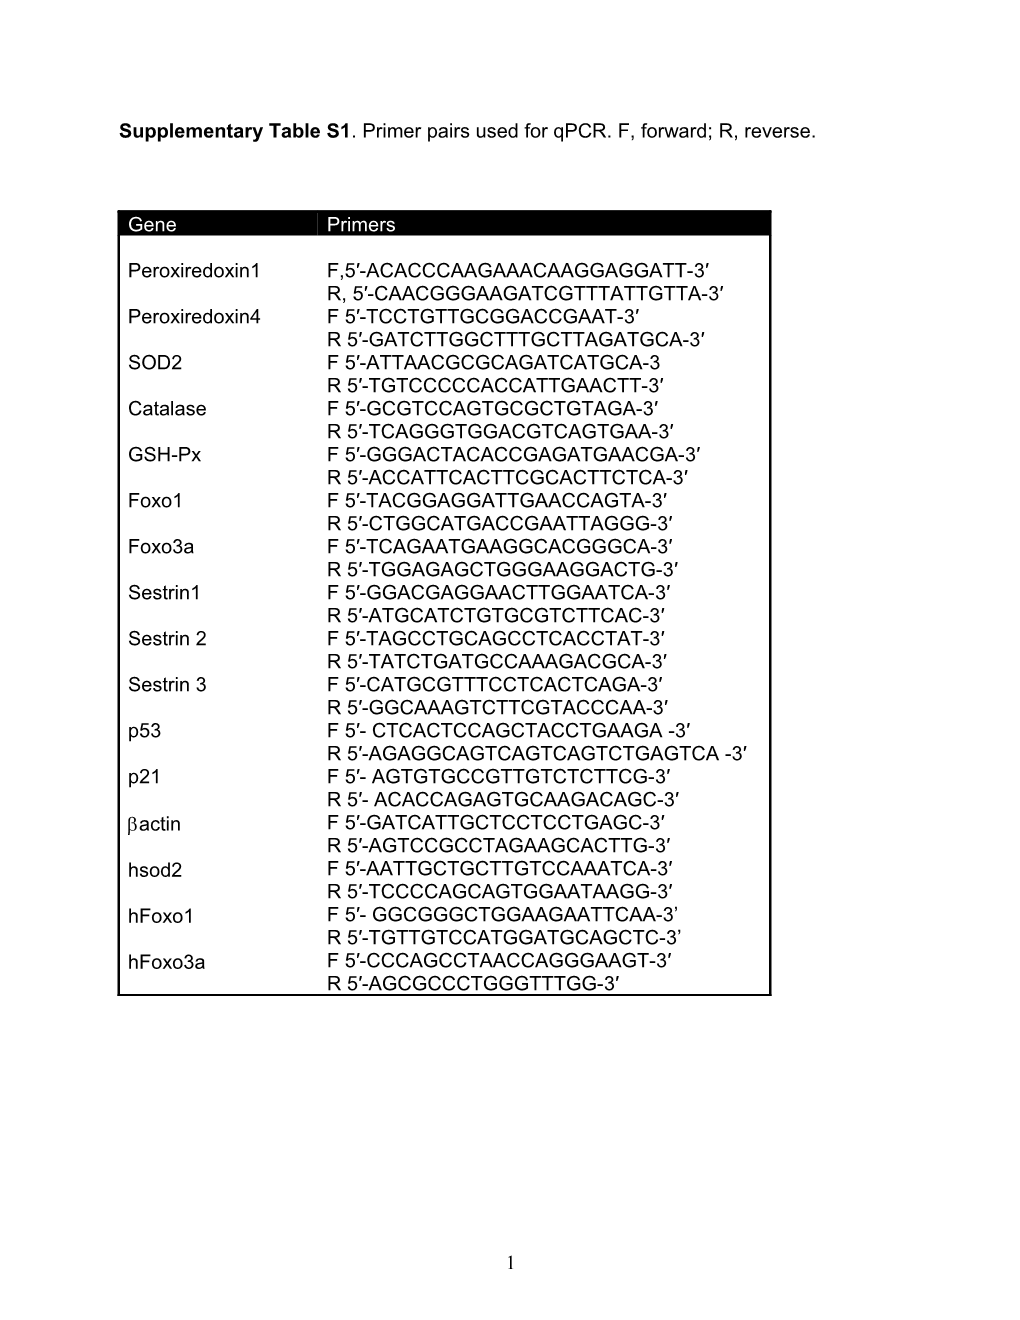 Supplementary Table S1 . Primer Pairs Used for Qpcr. F, Forward; R, Reverse